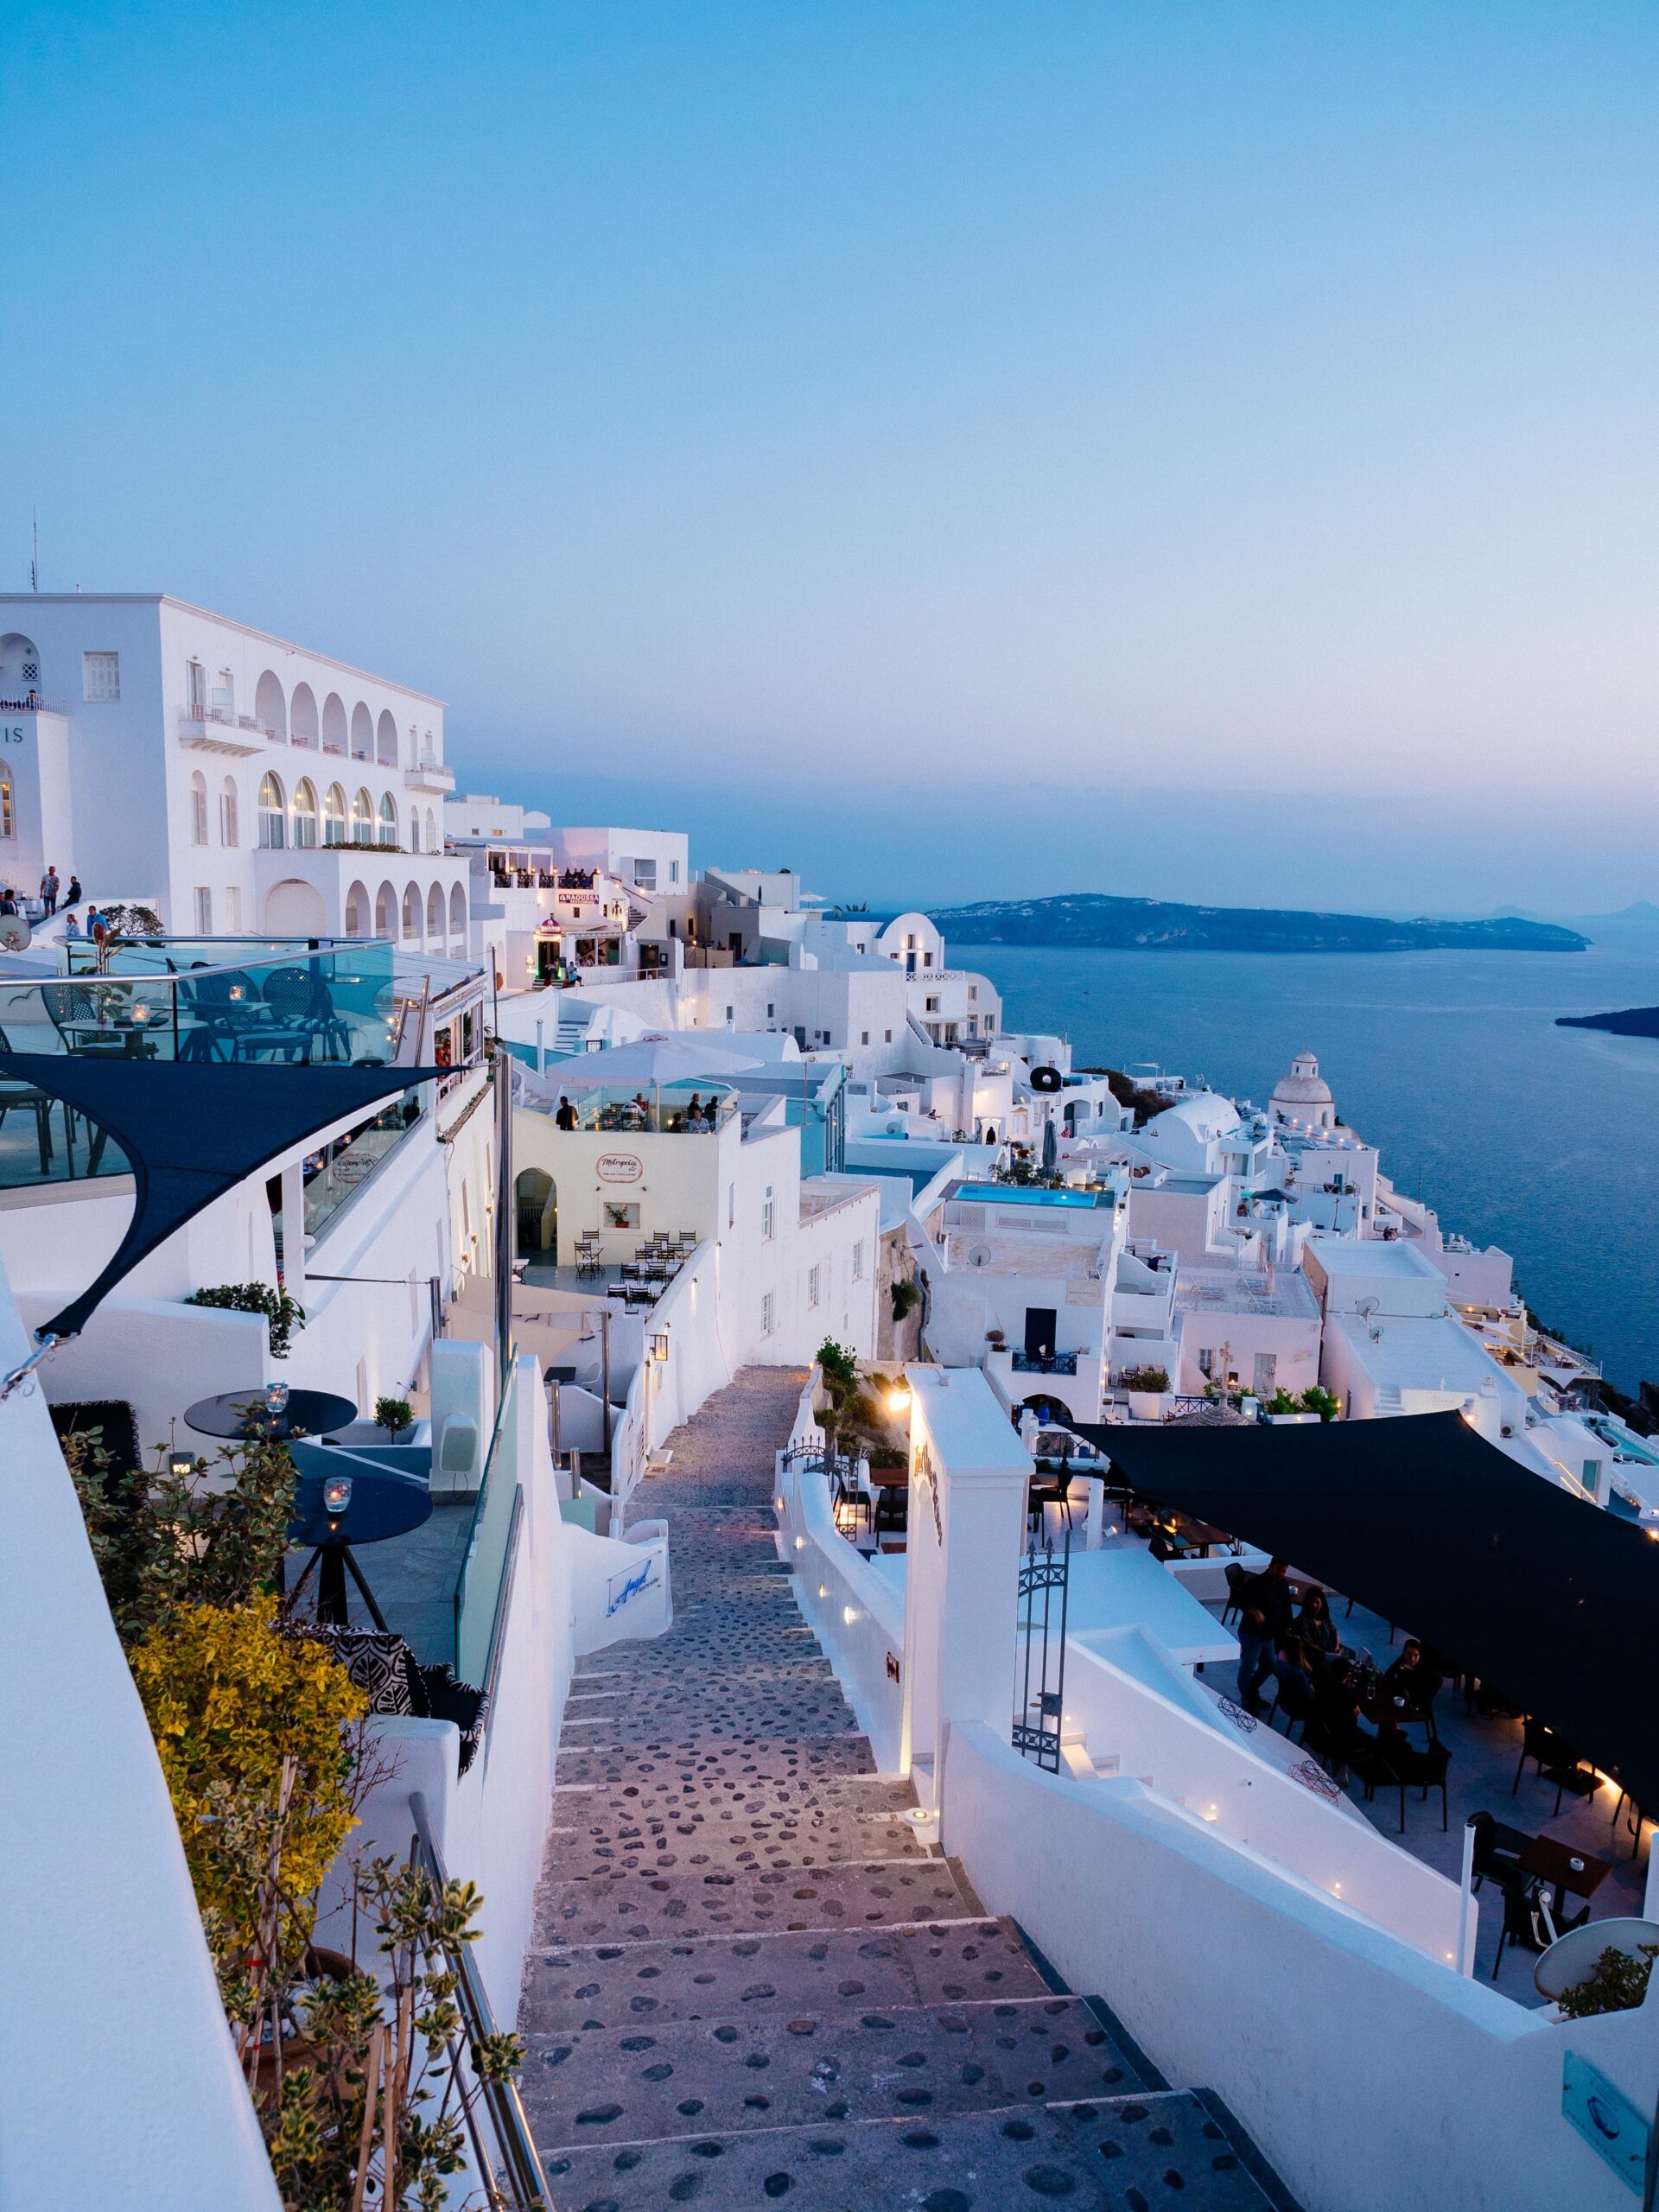 Vertical high angle shot of the white buildings in Santorini, Greece